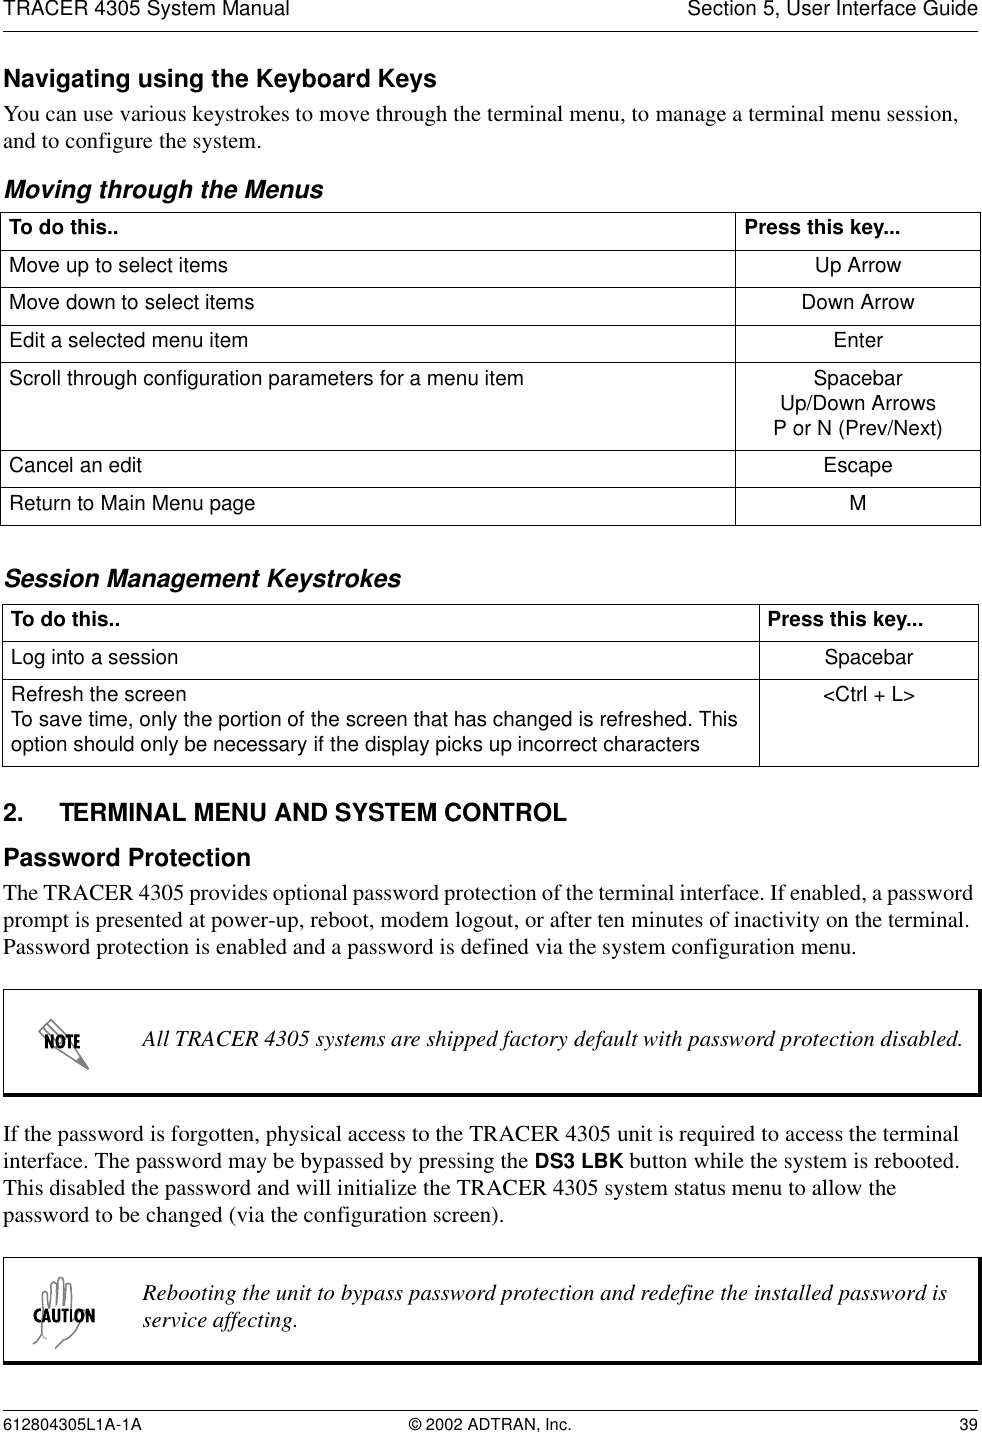 TRACER 4305 System Manual Section 5, User Interface Guide612804305L1A-1A © 2002 ADTRAN, Inc. 39Navigating using the Keyboard KeysYou can use various keystrokes to move through the terminal menu, to manage a terminal menu session, and to configure the system.Moving through the MenusSession Management Keystrokes2. TERMINAL MENU AND SYSTEM CONTROLPassword ProtectionThe TRACER 4305 provides optional password protection of the terminal interface. If enabled, a password prompt is presented at power-up, reboot, modem logout, or after ten minutes of inactivity on the terminal. Password protection is enabled and a password is defined via the system configuration menu.If the password is forgotten, physical access to the TRACER 4305 unit is required to access the terminal interface. The password may be bypassed by pressing the DS3 LBK button while the system is rebooted. This disabled the password and will initialize the TRACER 4305 system status menu to allow the password to be changed (via the configuration screen).To do this.. Press this key...Move up to select items Up ArrowMove down to select items Down ArrowEdit a selected menu item EnterScroll through configuration parameters for a menu item SpacebarUp/Down ArrowsP or N (Prev/Next)Cancel an edit EscapeReturn to Main Menu page MTo do this.. Press this key...Log into a session SpacebarRefresh the screenTo save time, only the portion of the screen that has changed is refreshed. This option should only be necessary if the display picks up incorrect characters&lt;Ctrl + L&gt;All TRACER 4305 systems are shipped factory default with password protection disabled.Rebooting the unit to bypass password protection and redefine the installed password is service affecting.